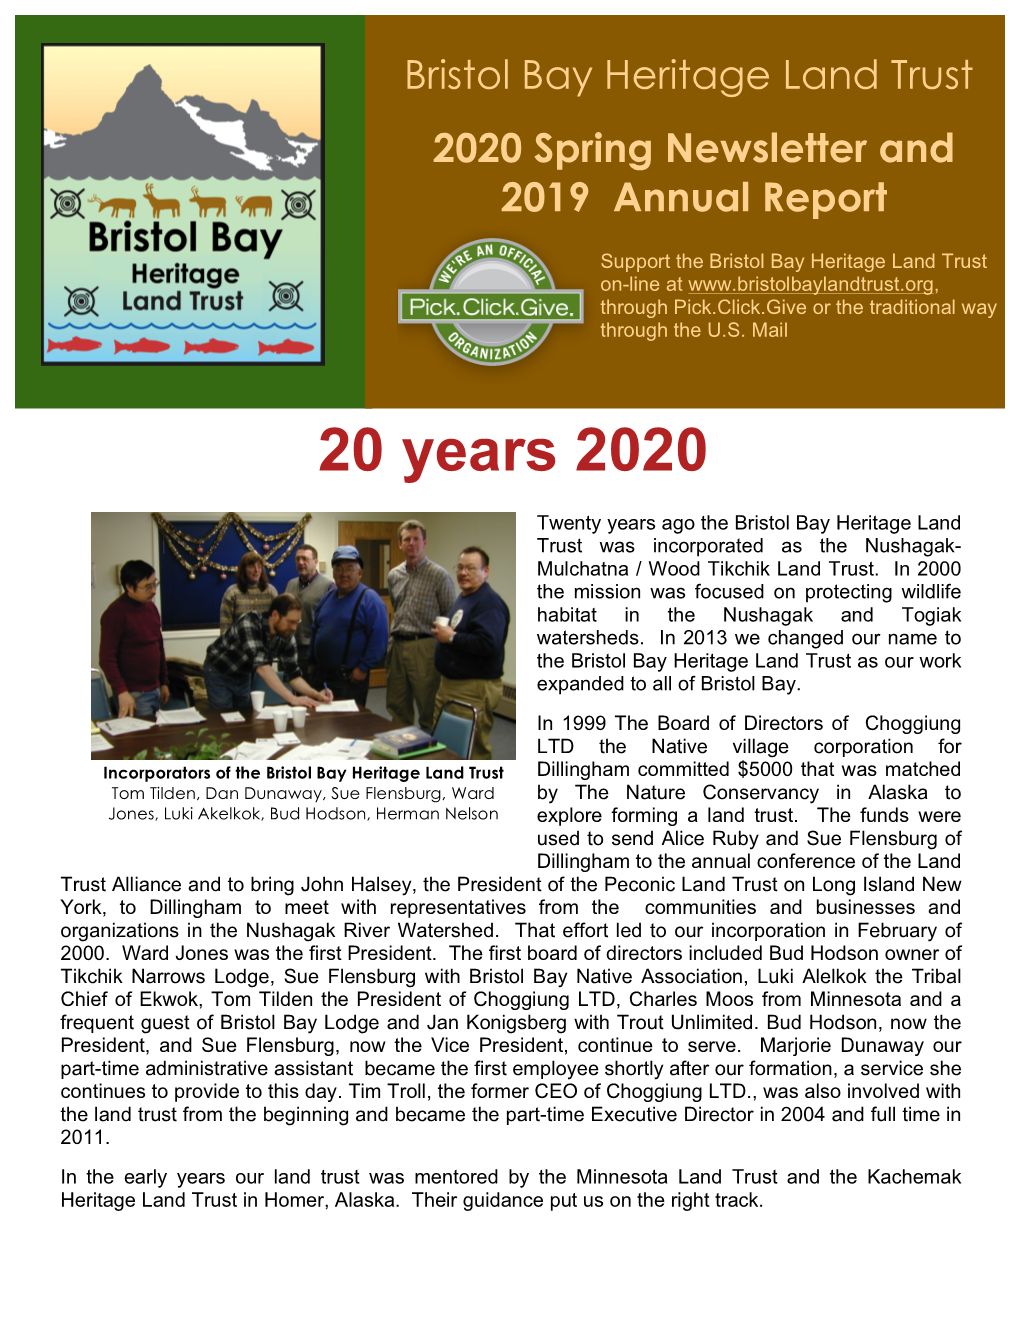 Most Recent Annual Report